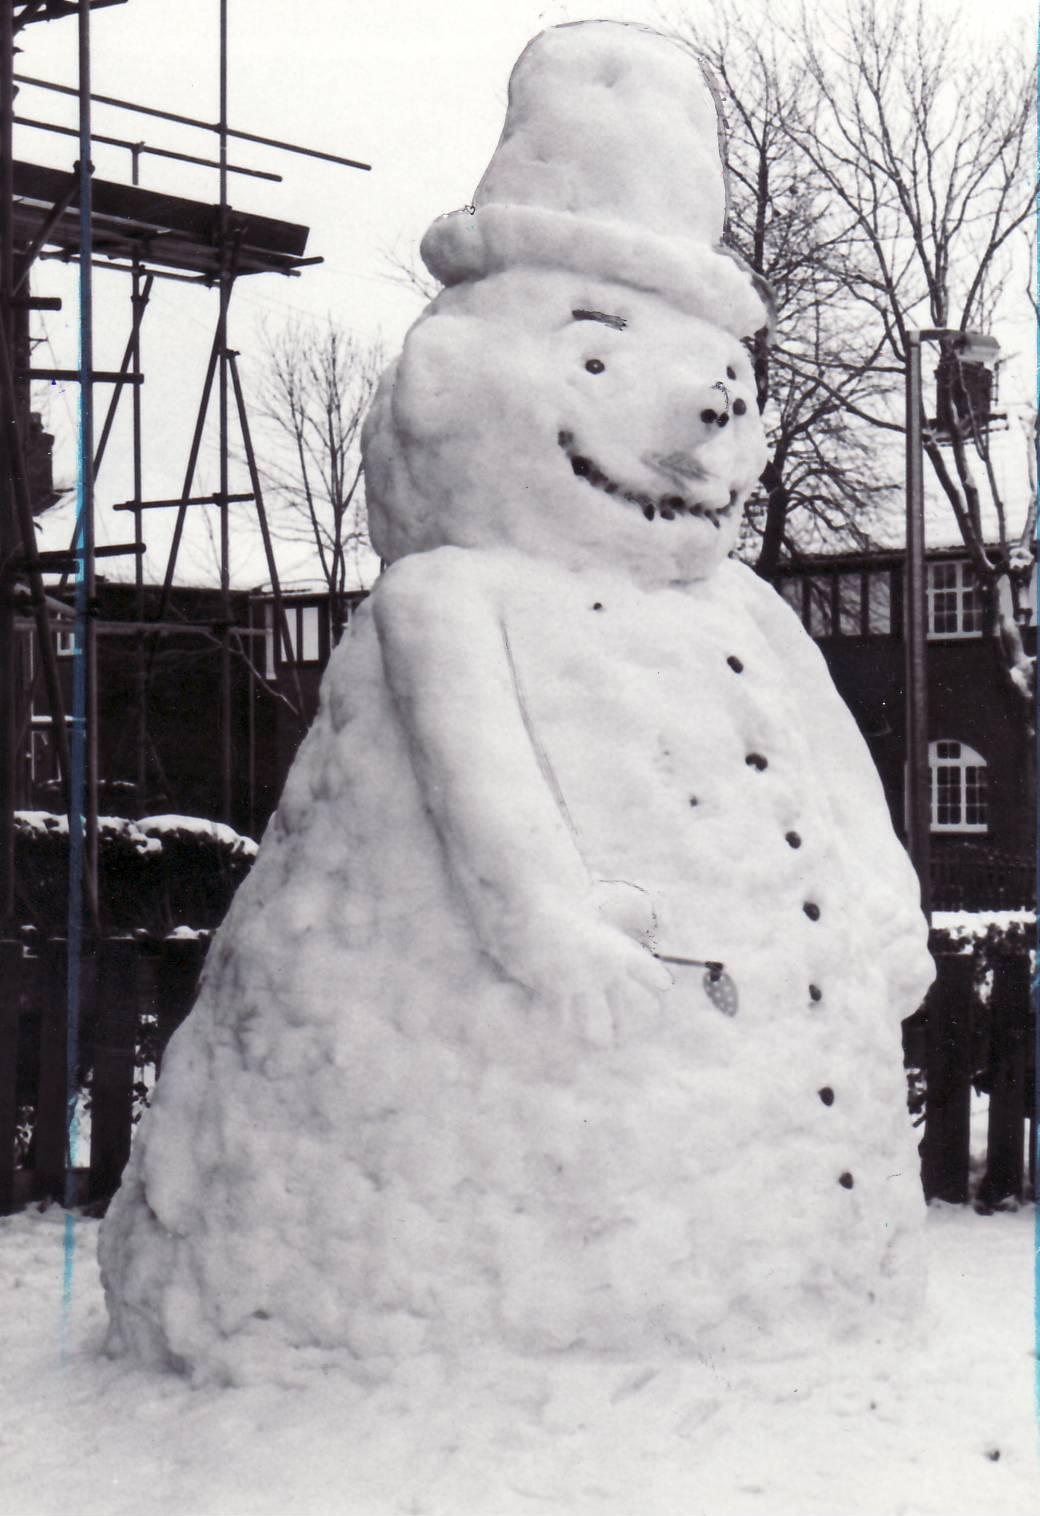 January 1984 - 12ft snowman built by mum Brenda Gornall and her neighbours for son Darren in Green Way, Hall i'th'Wood